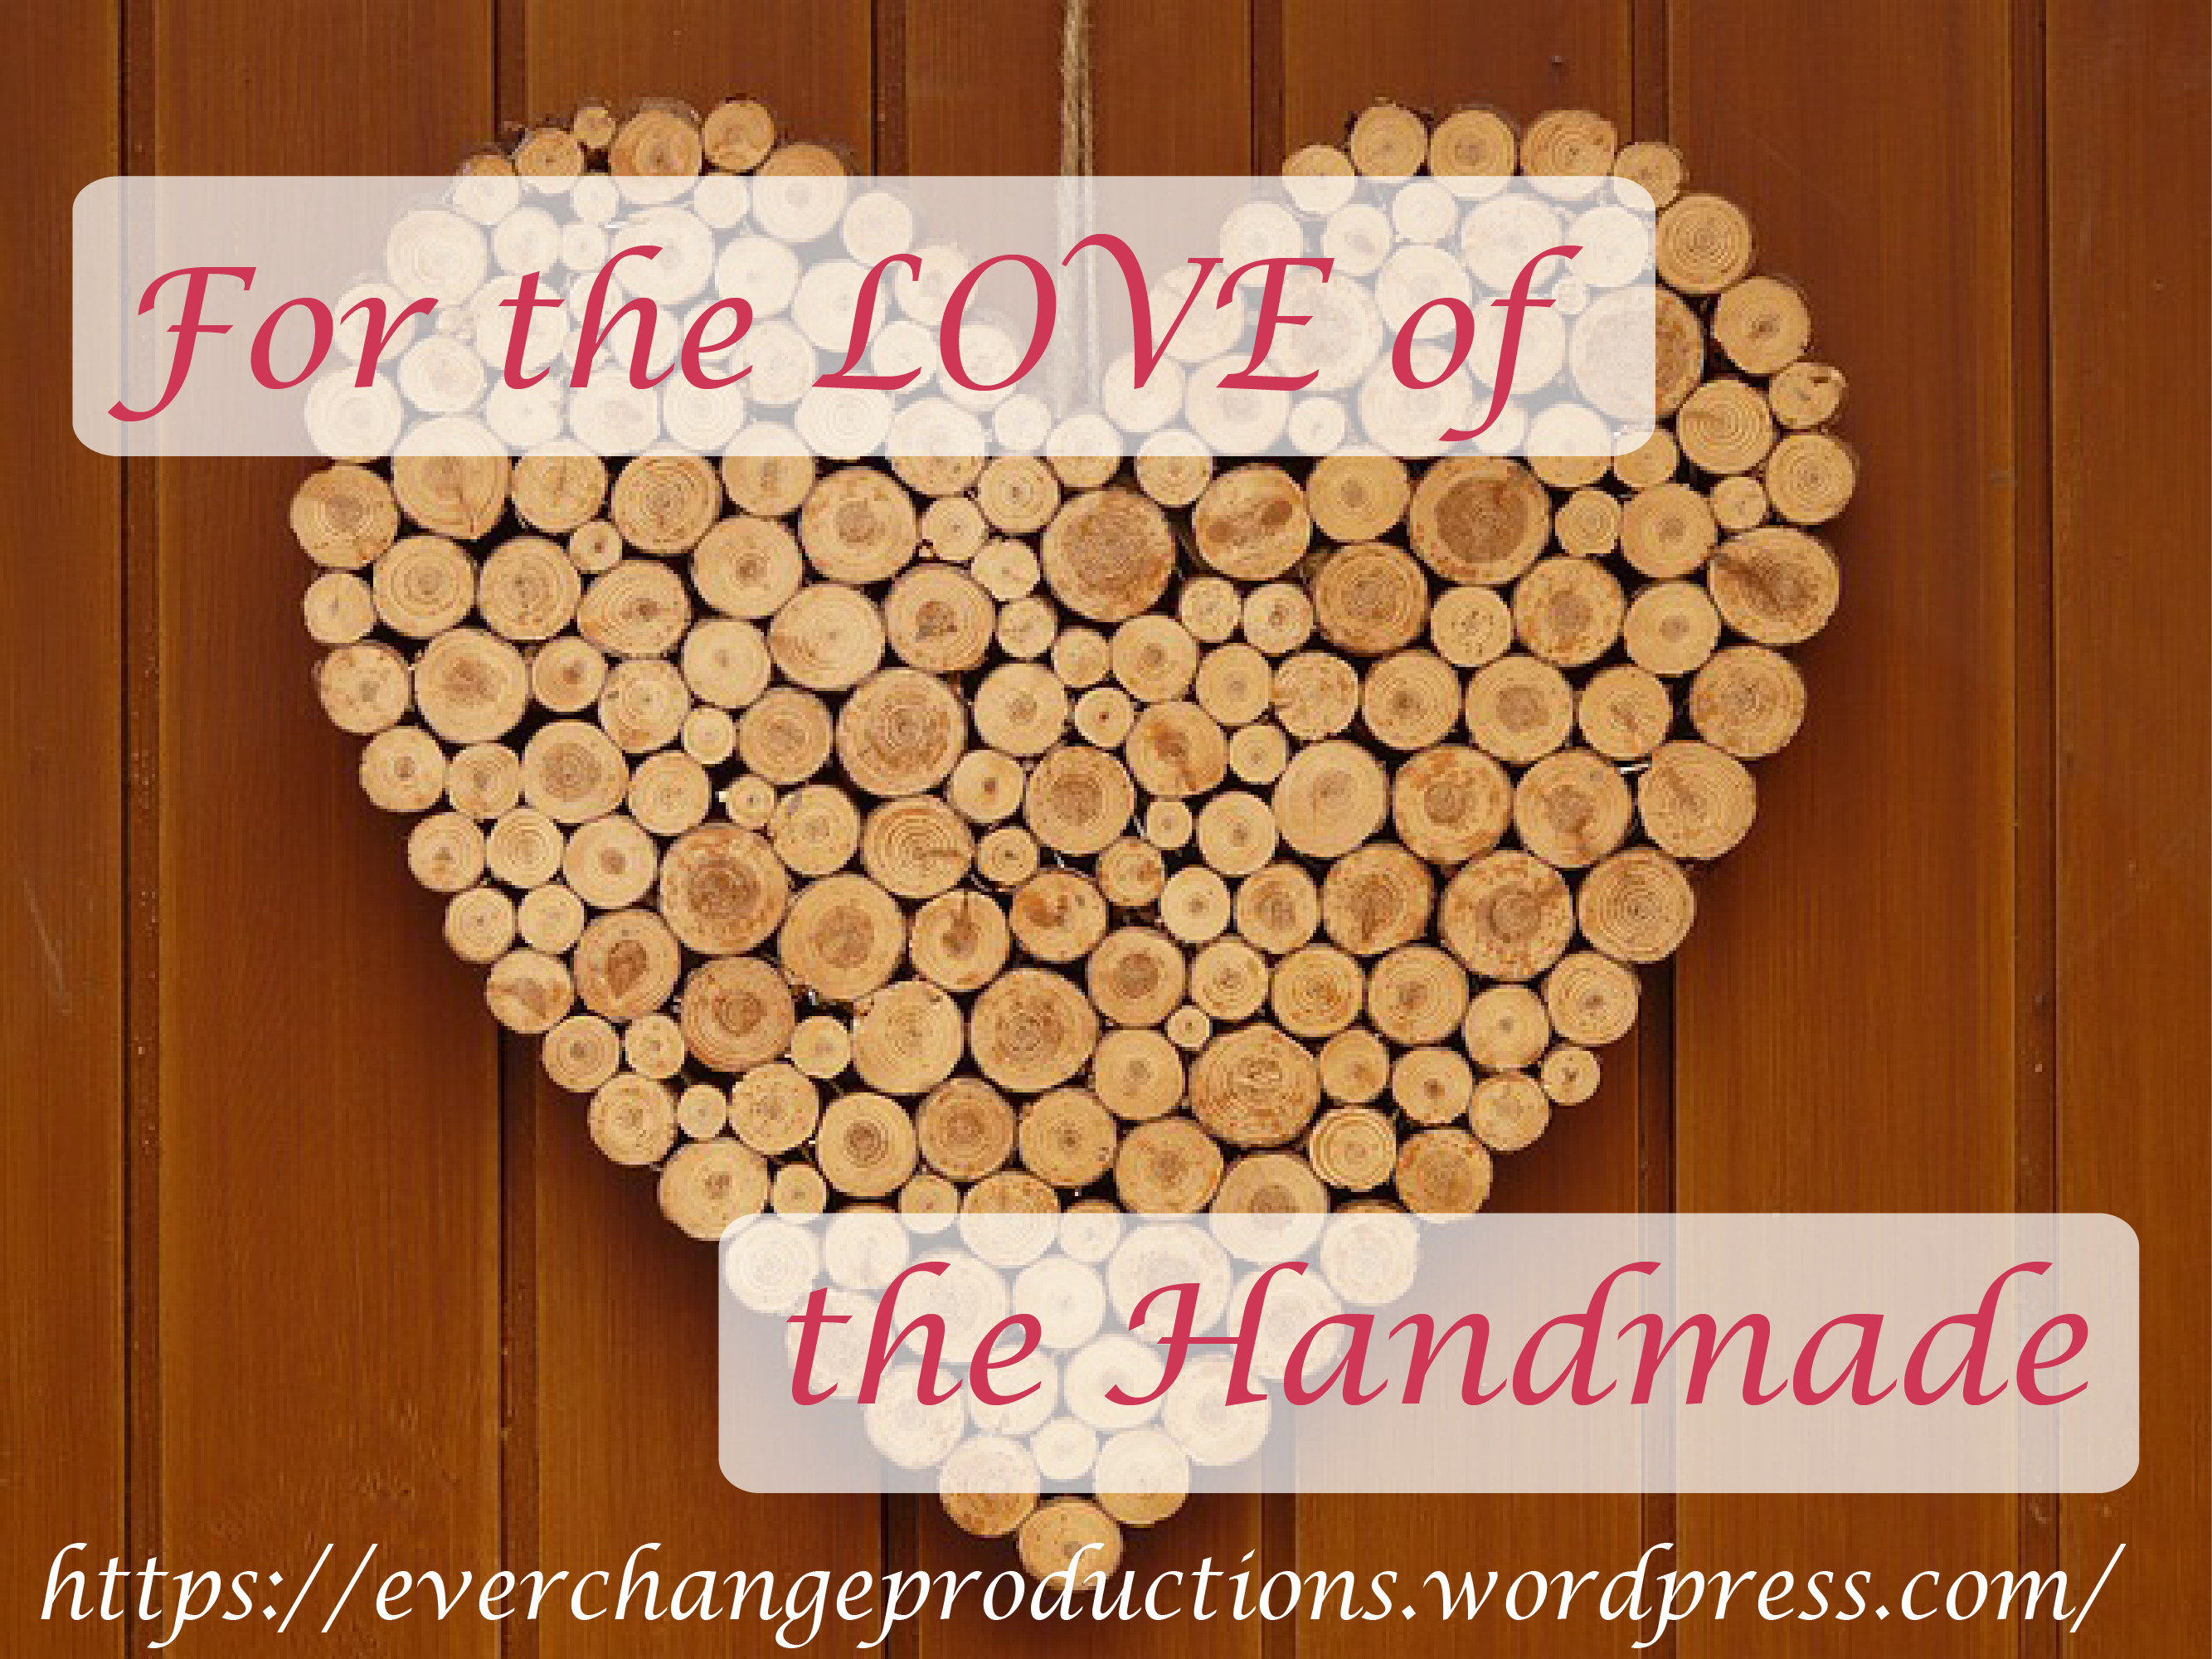 For the love of the handmade